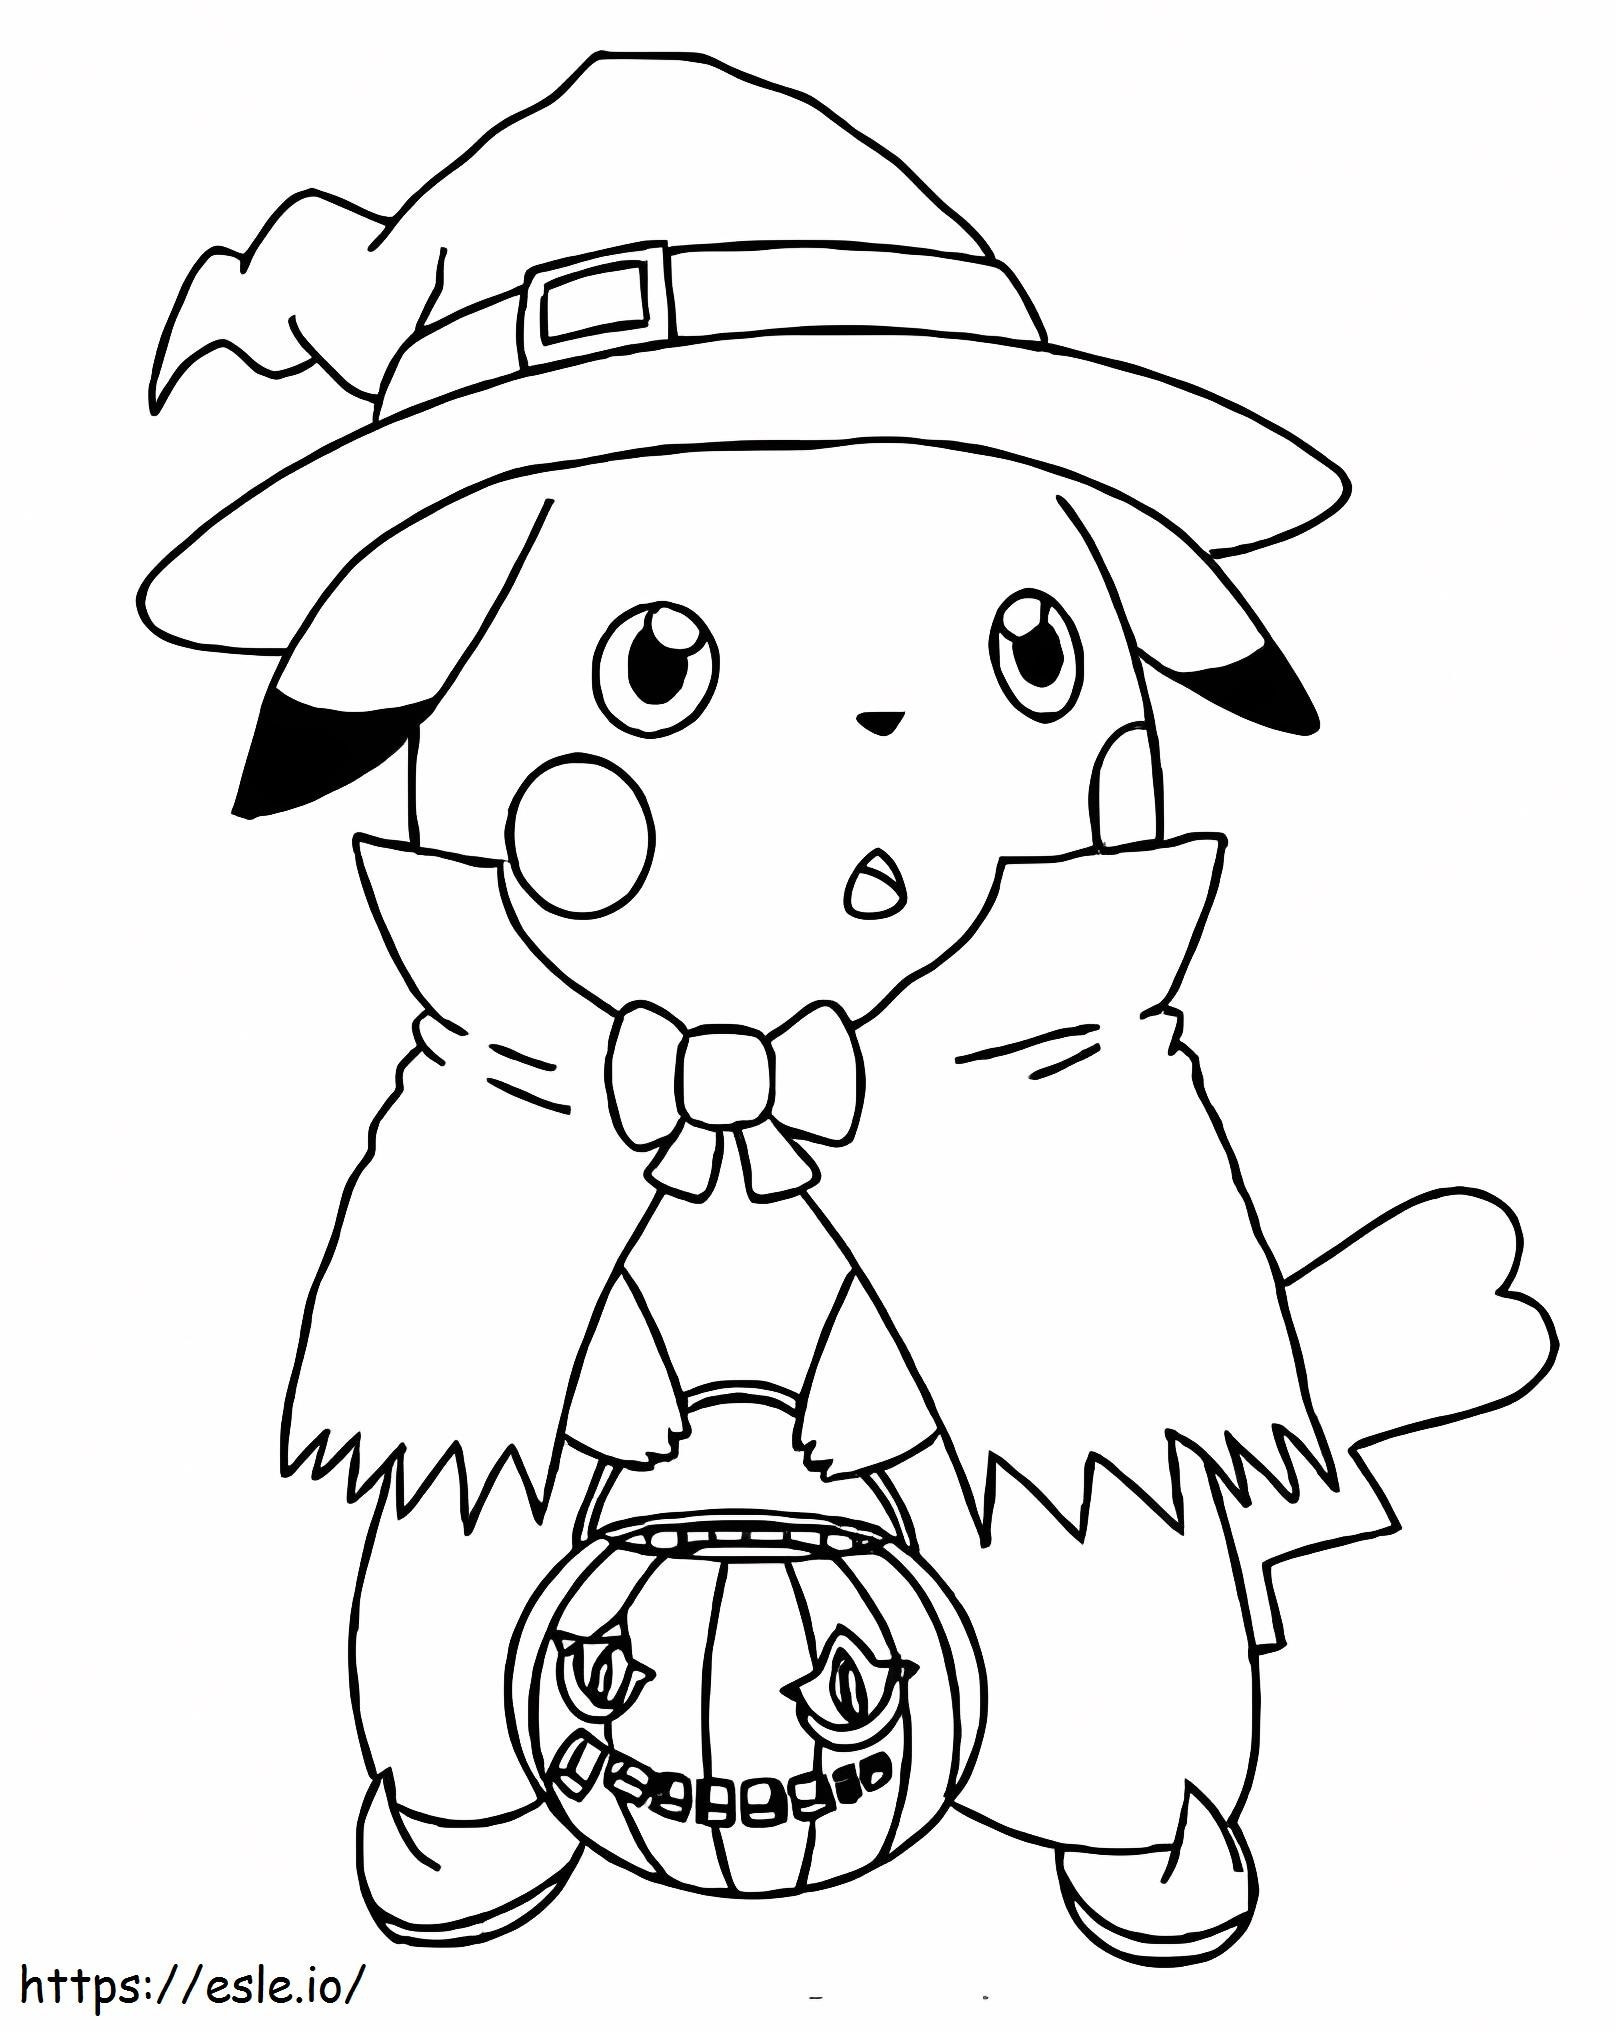 Cute Halloween Pikachu coloring page